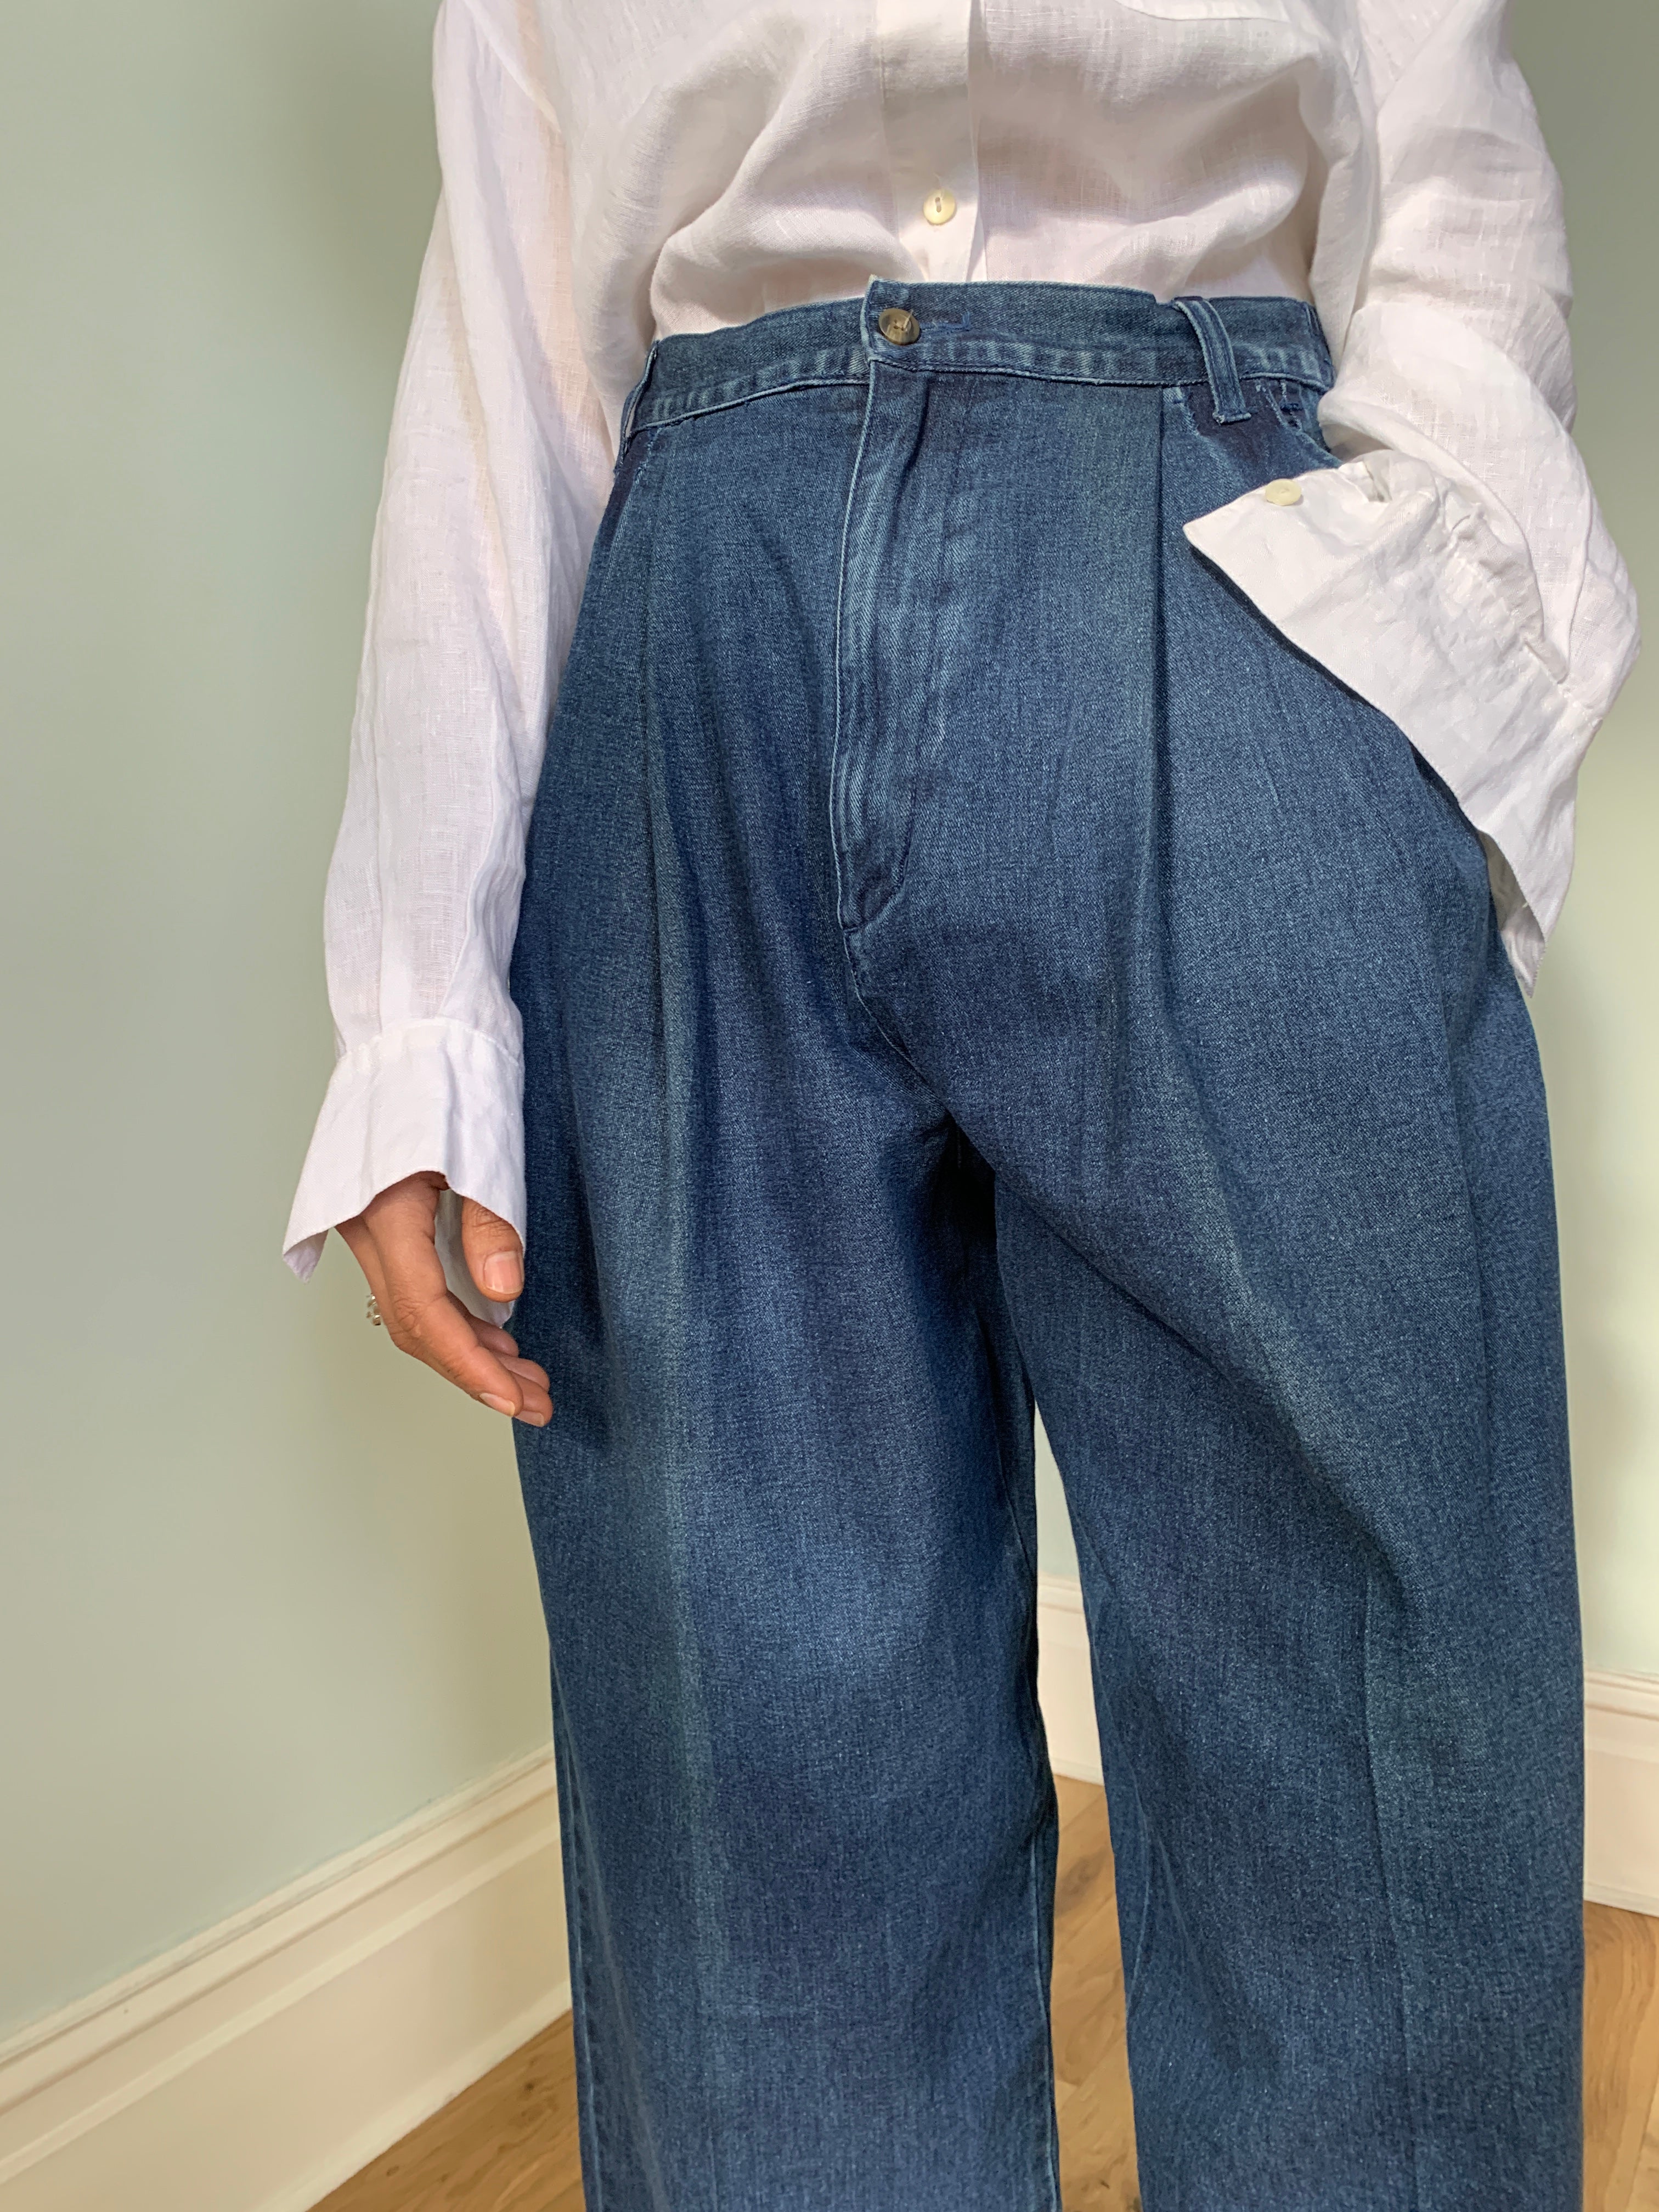 Vintage high waisted pleat cropped jeans W28"